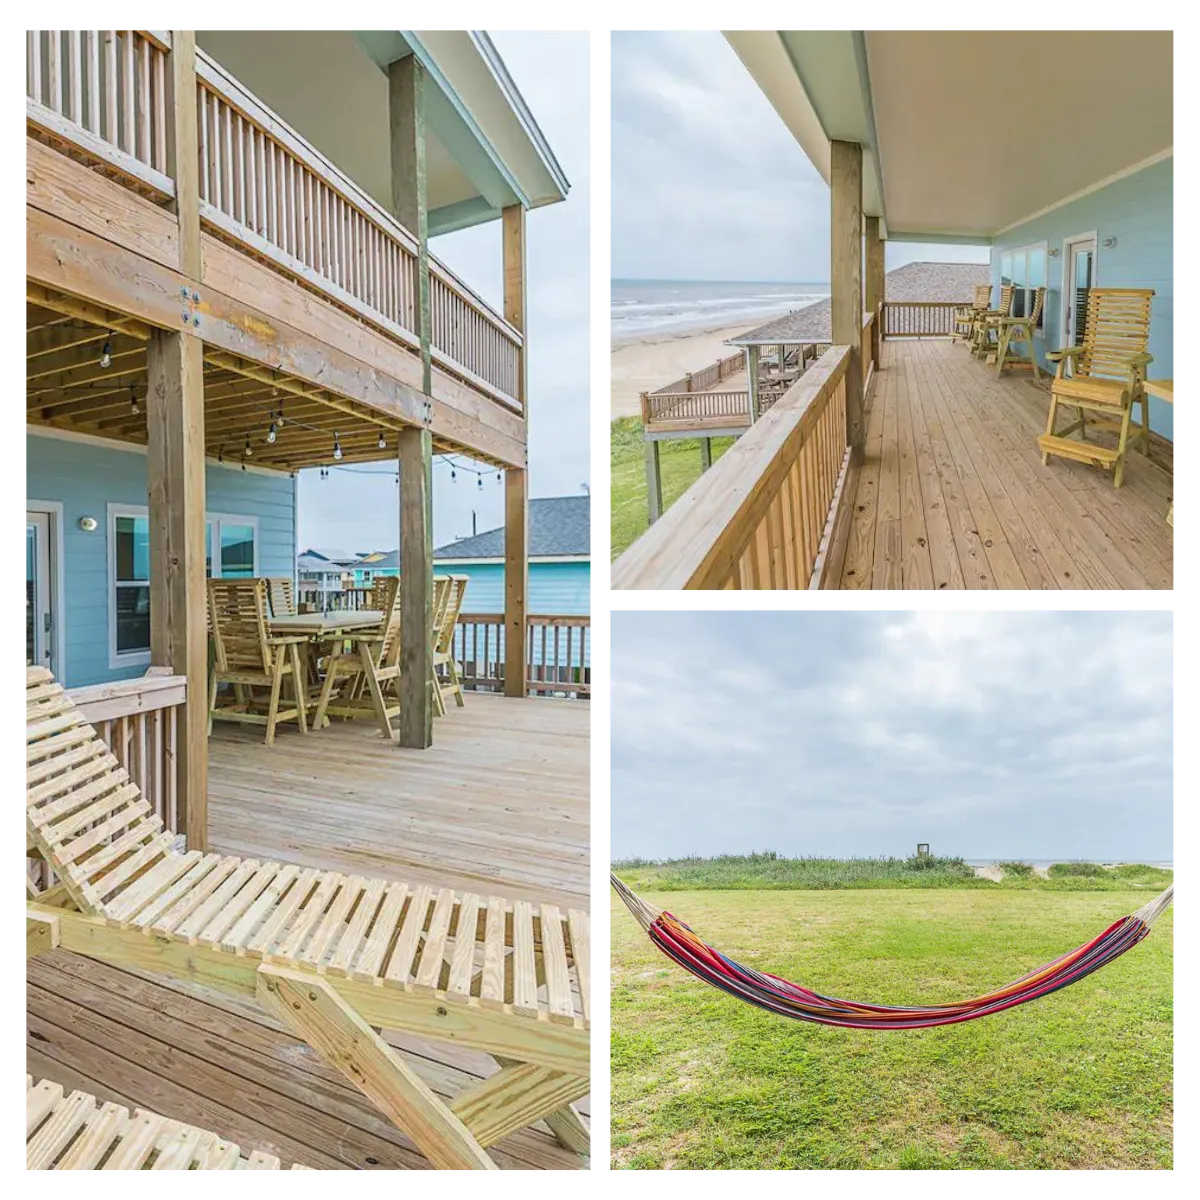 At Redfish Retreat, step out to the beach, relax on decks with ocean views, enjoy outdoor fun with amenities like hammocks and games, and unwind at the tiki bar with tropical vibes.